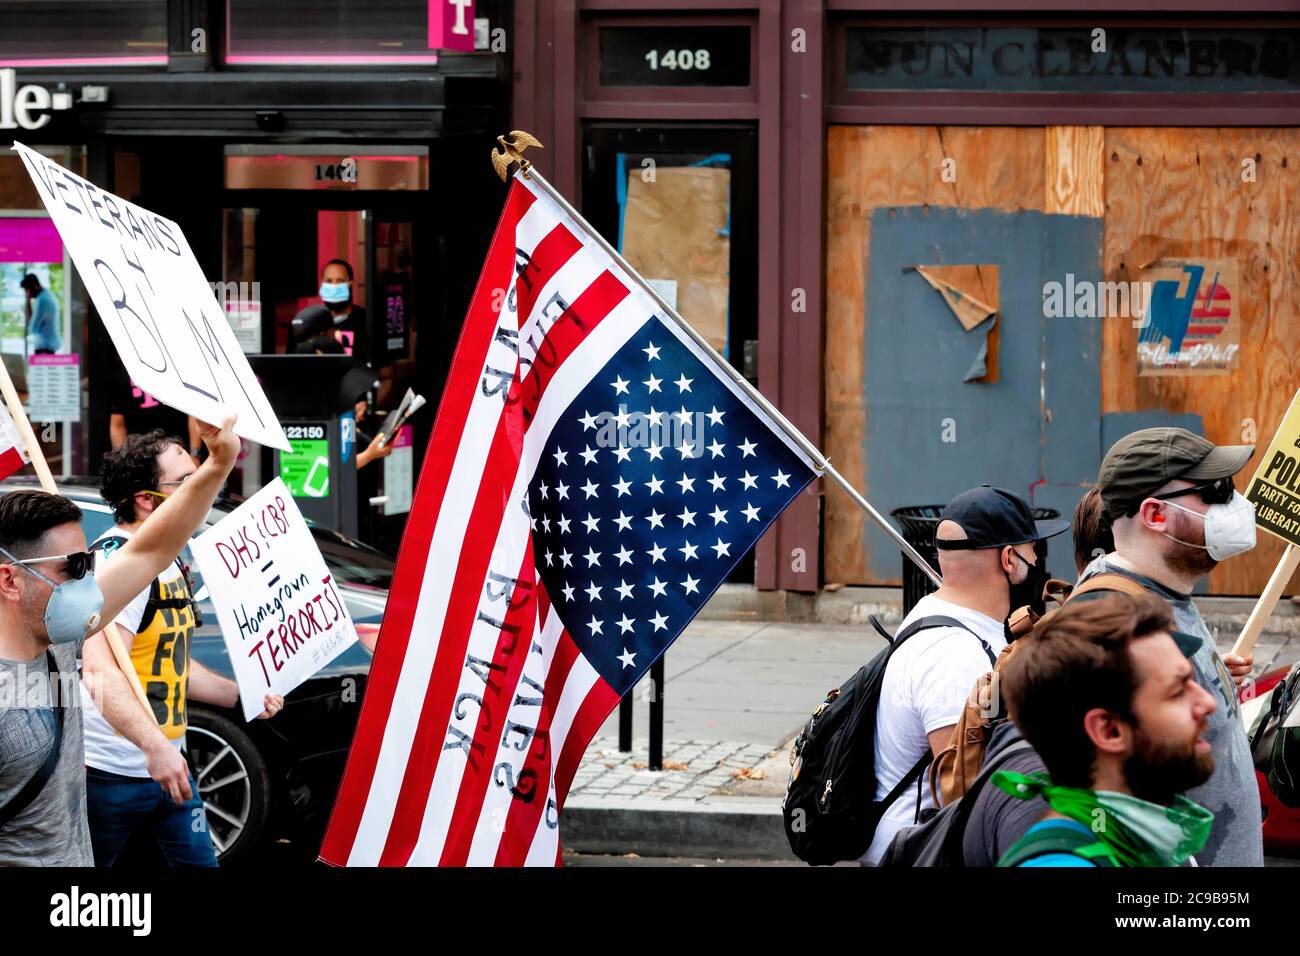 A protester carries an American flag upside down in the March Against Trump's Police State, Washington, DC, United States Stock Photo